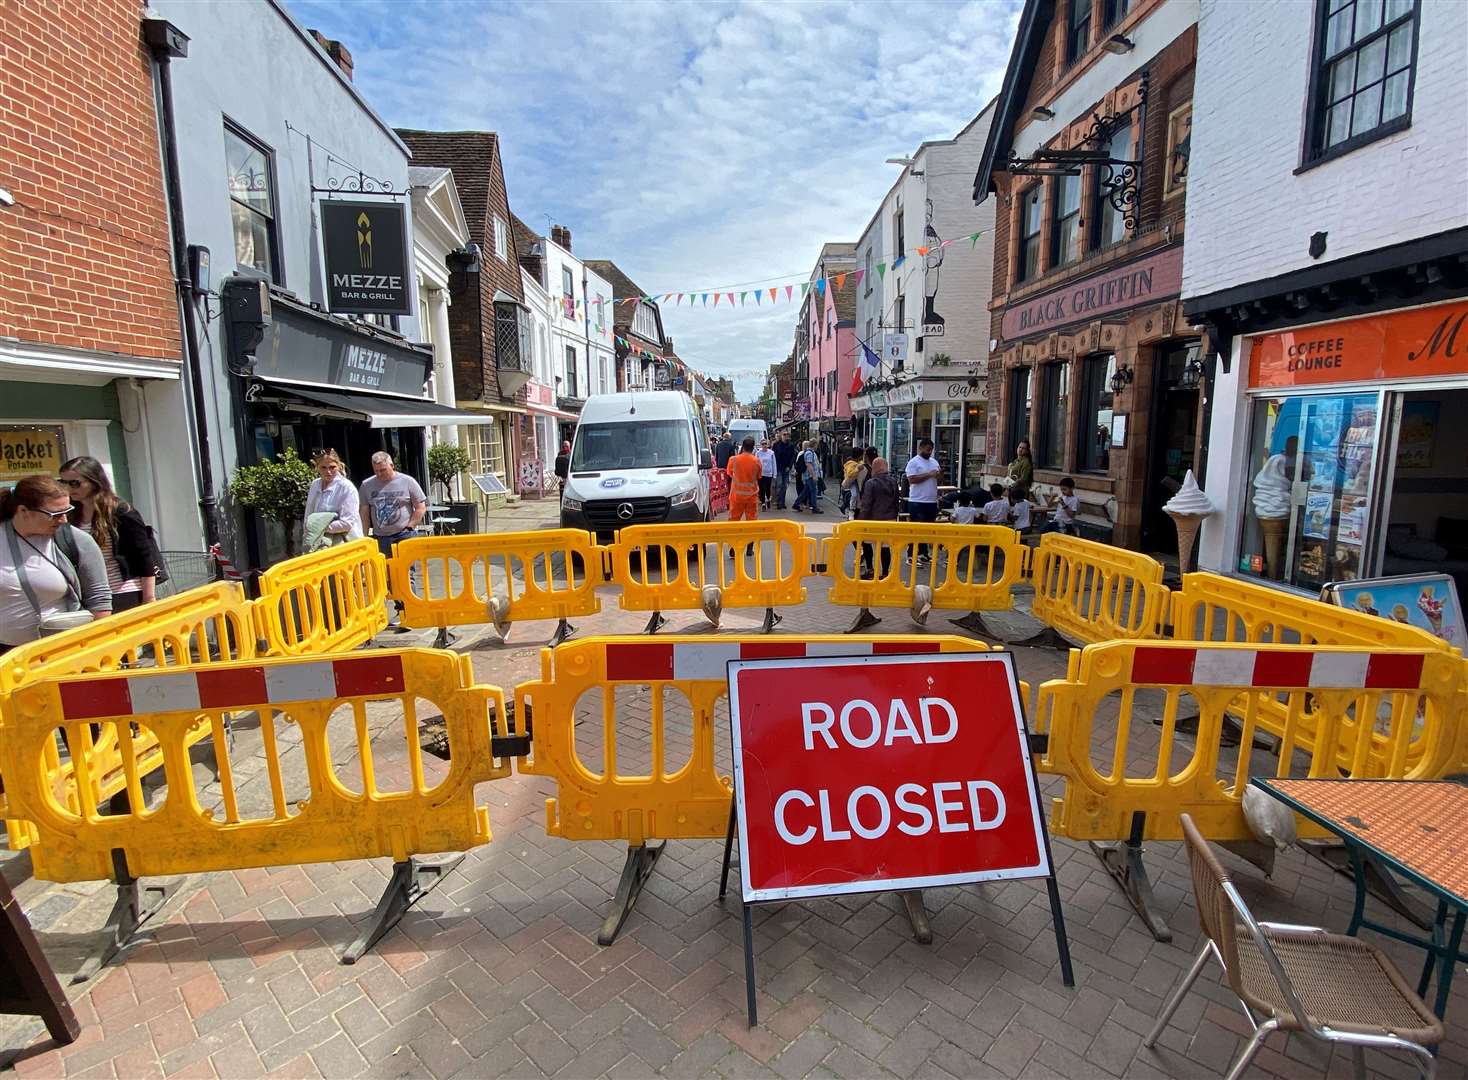 Kent County highways say the section of Canterbury high street must remain closed for further investigatory works